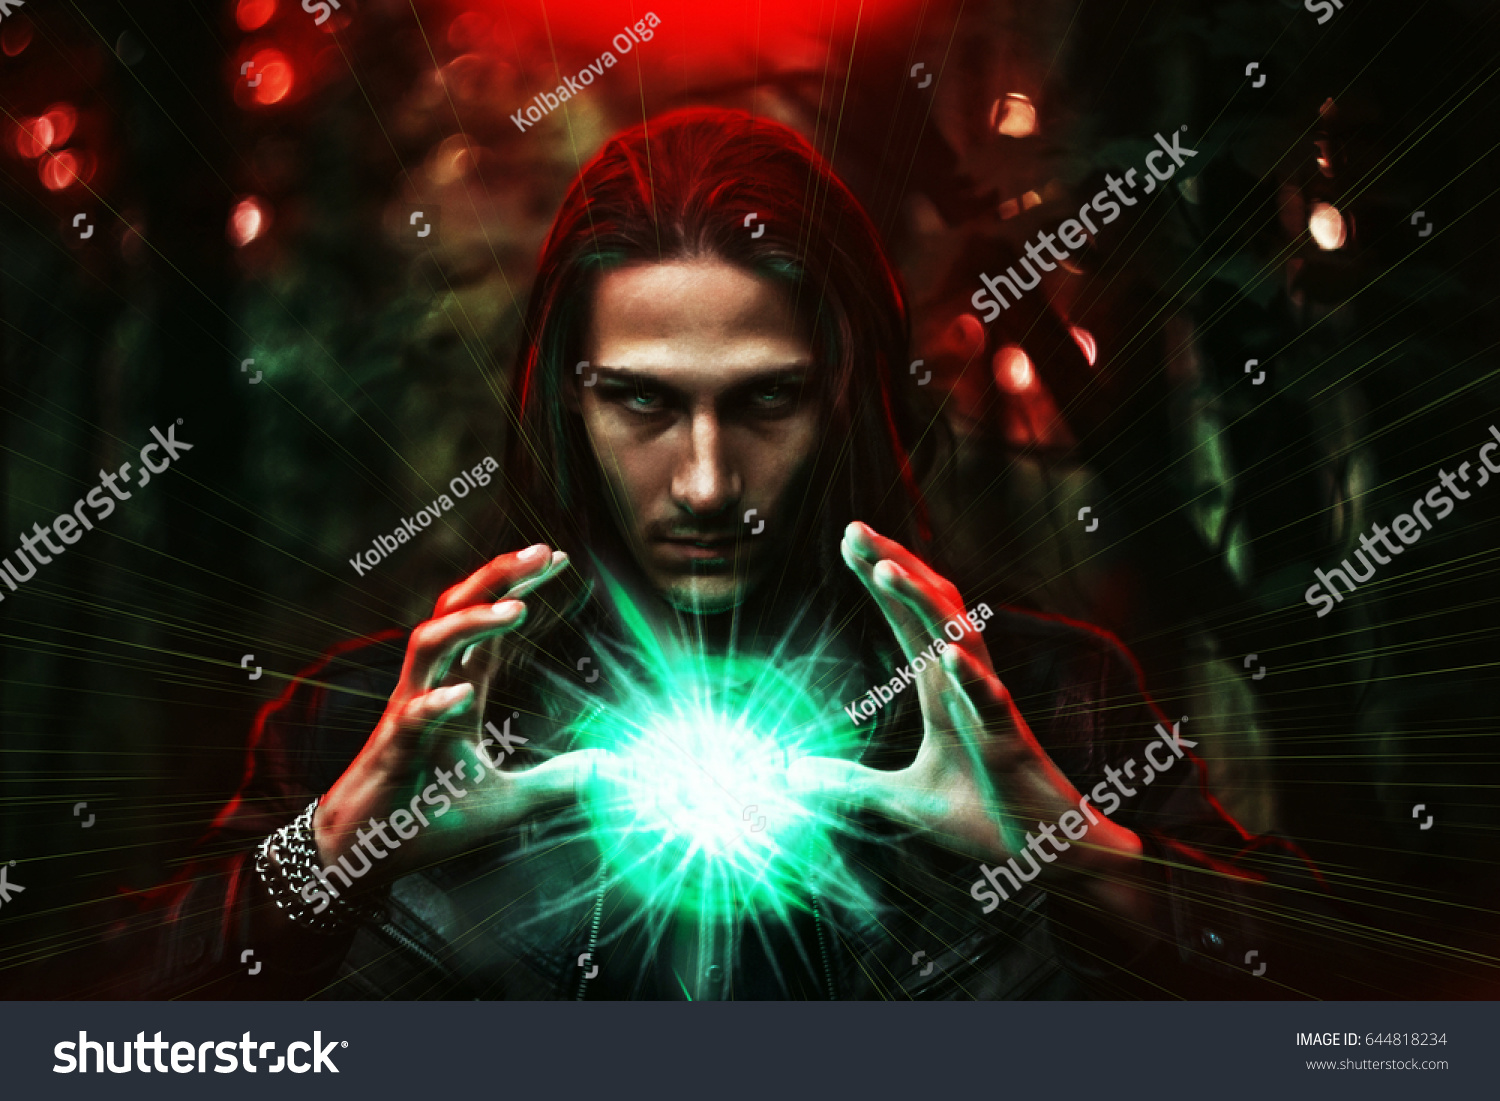 Long haired white male with a mystical glowing orb to signify power, magic, spirituality and so forth #644818234